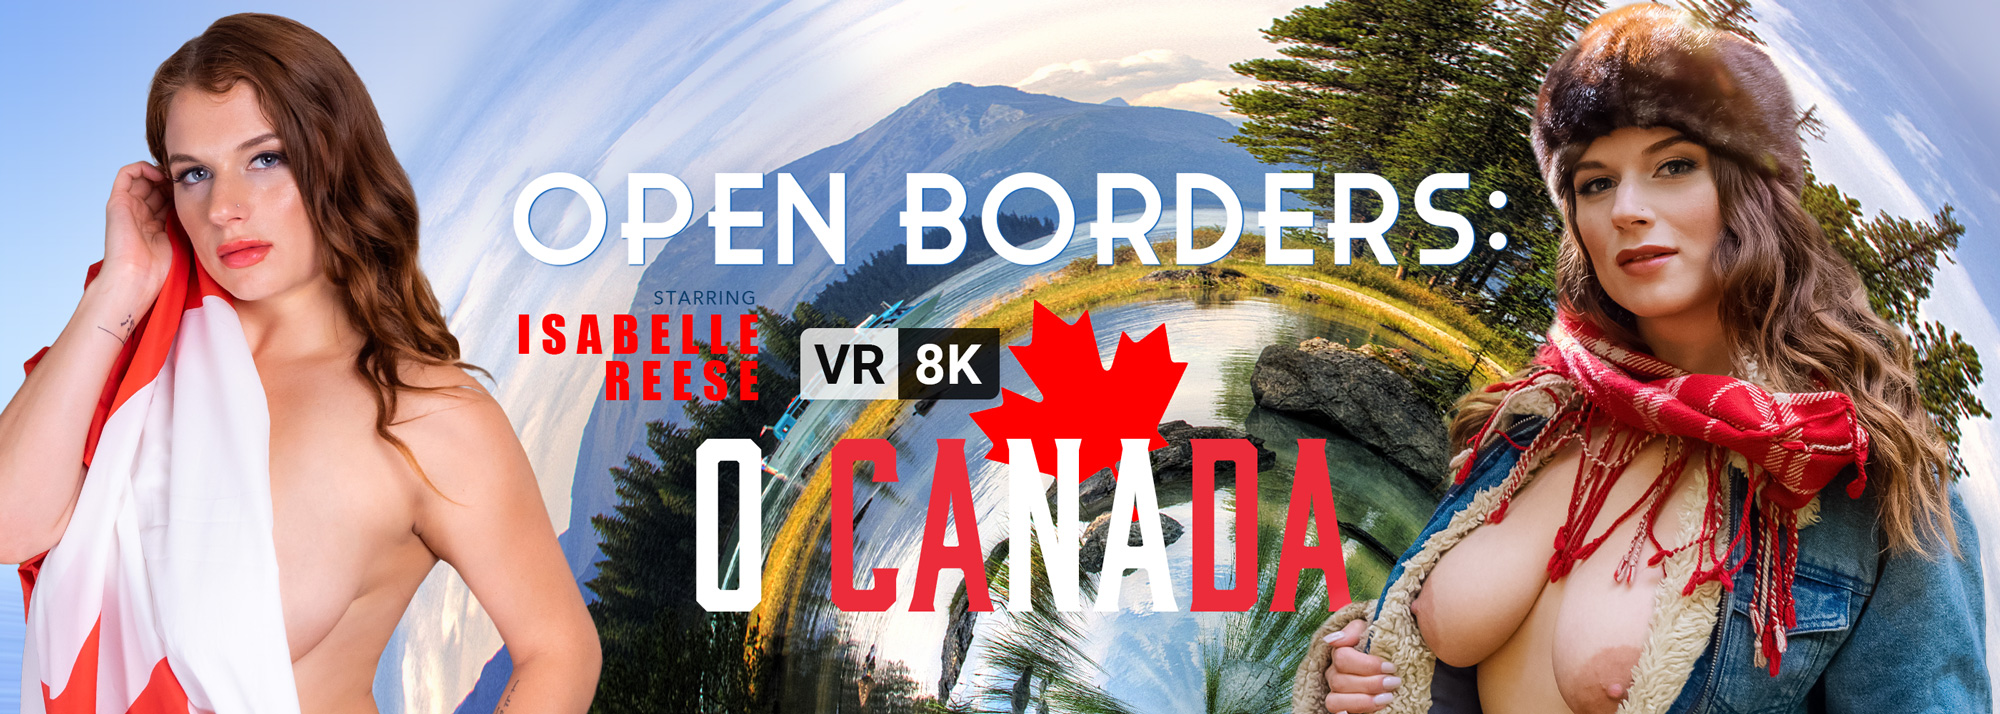 Open Borders: O Canada - VR Porn Video, Starring: Isabelle Reese